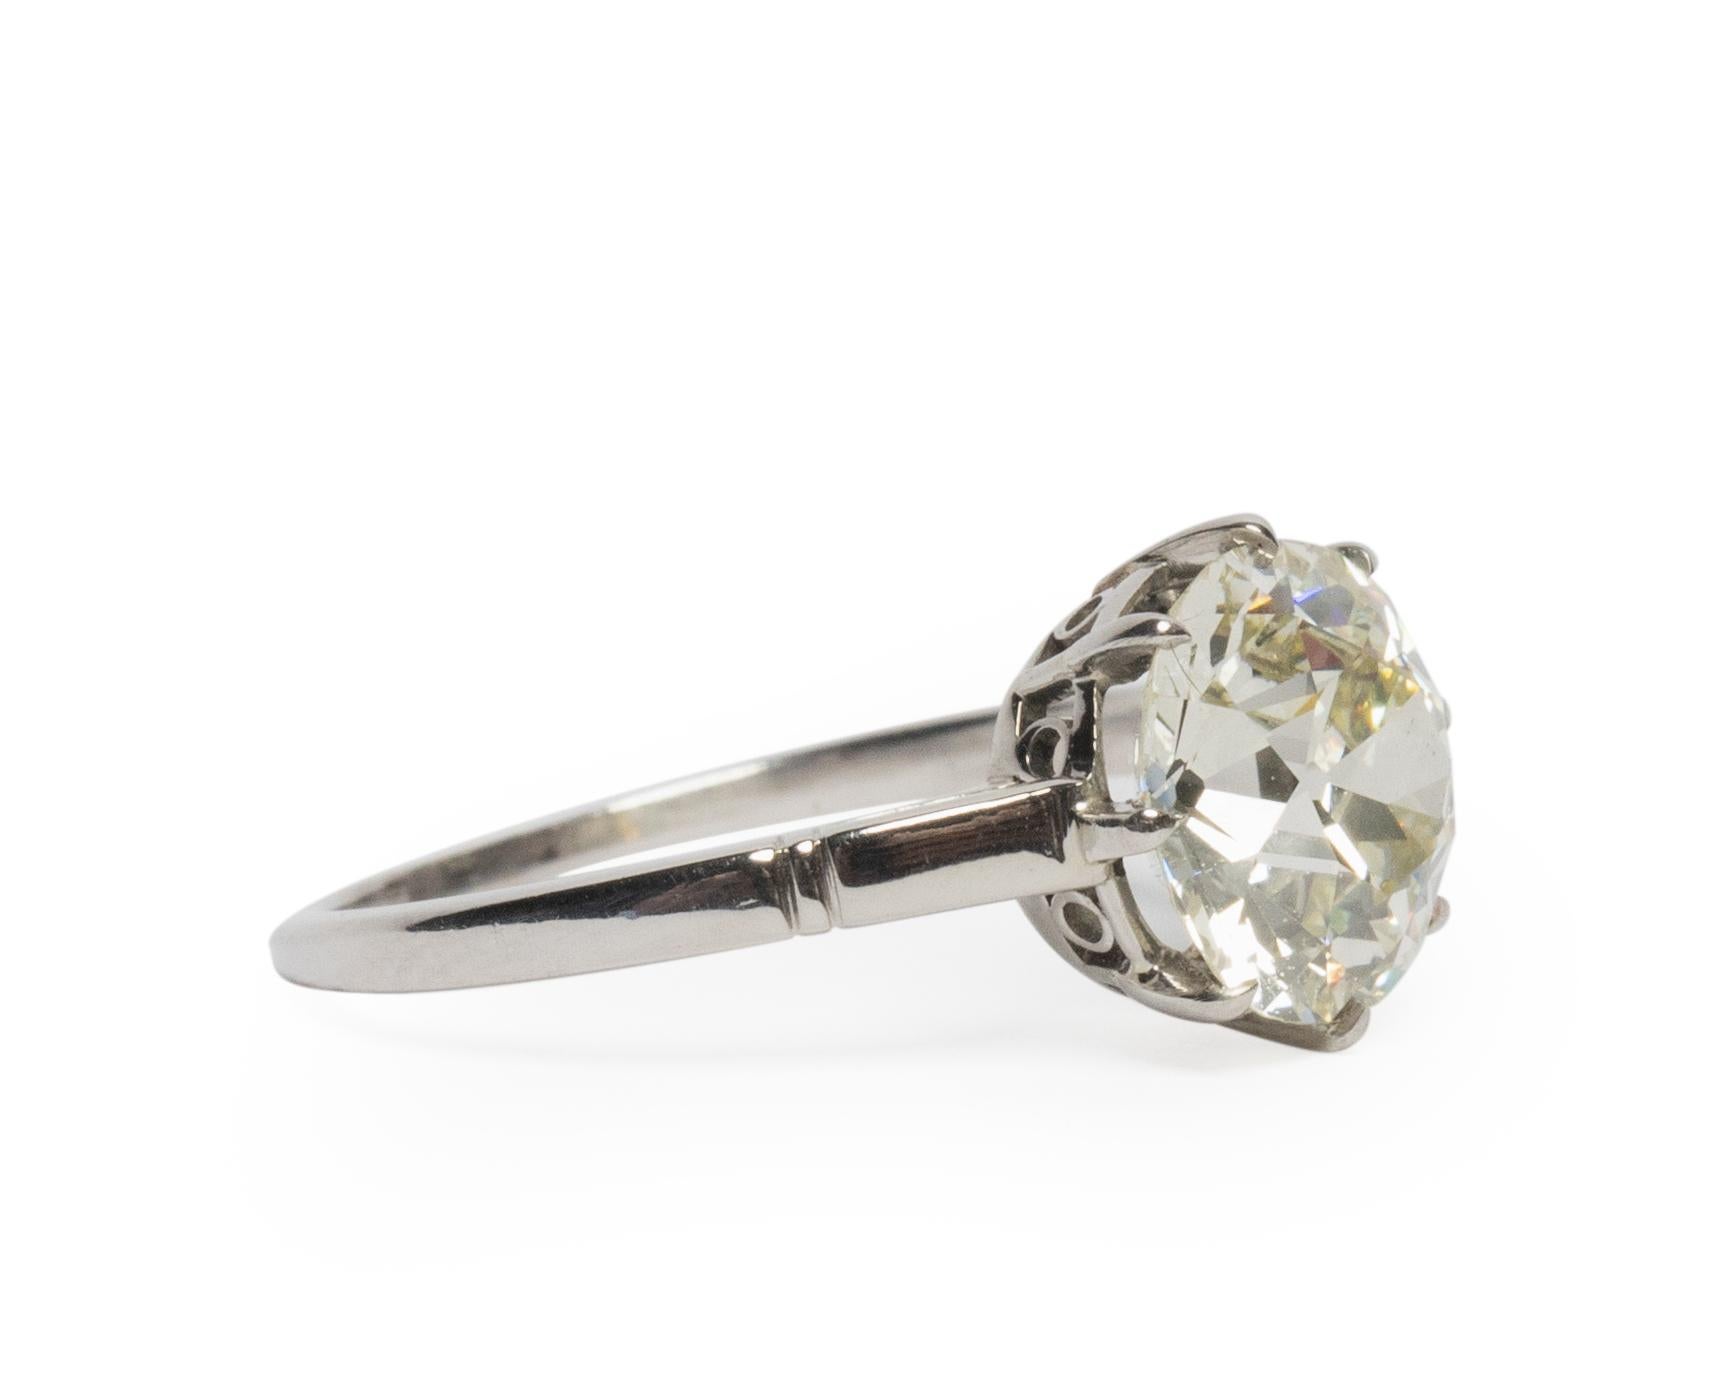 Item Details: 
Ring Size: 7.25
Metal Type: Platinum [Hallmarked, and Tested]
Weight: 3.5 grams

Center Diamond Details:
GIA REPORT #: 2211234209
Weight: 2.92 Carat
Cut: Old European Brilliant
Color: OP
Clarity: VS1

Finger to Top of Stone